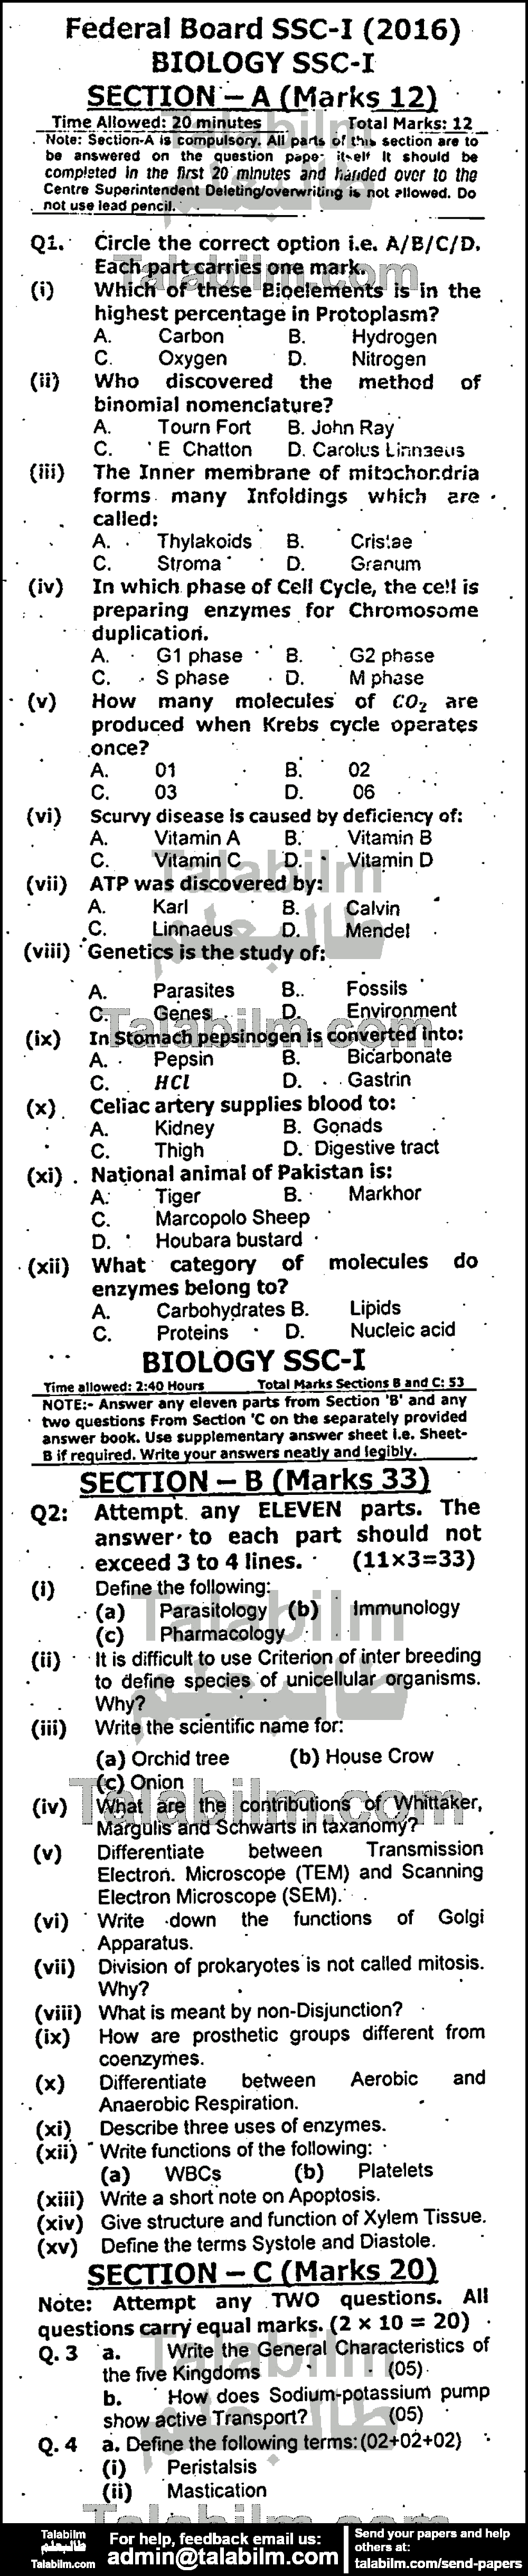 Biology 0 past paper for 2016 Group-I